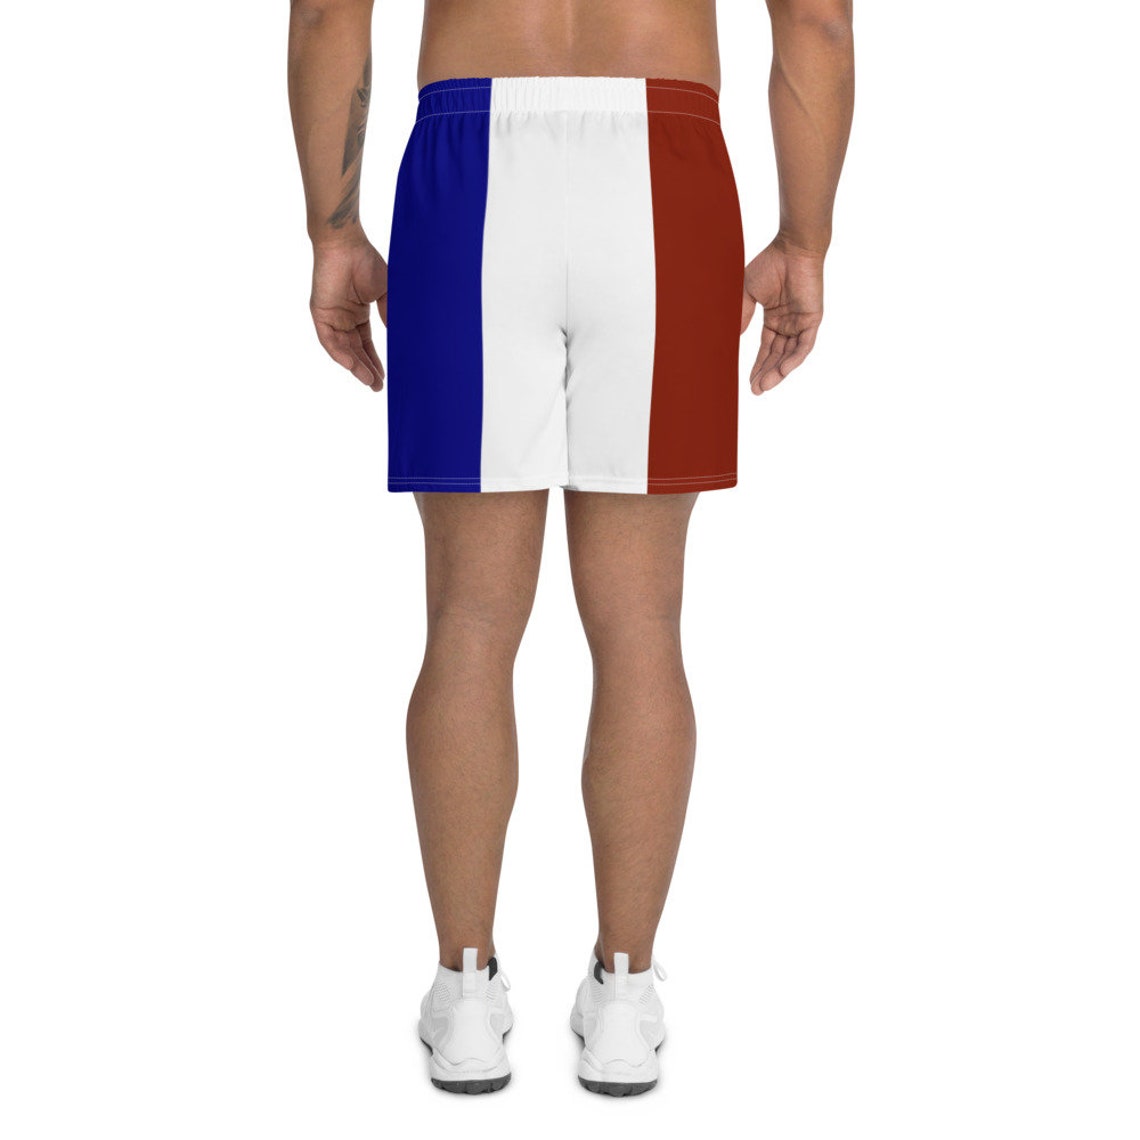 Long Men's Shorts With the Colors of the Flag of France. - Etsy